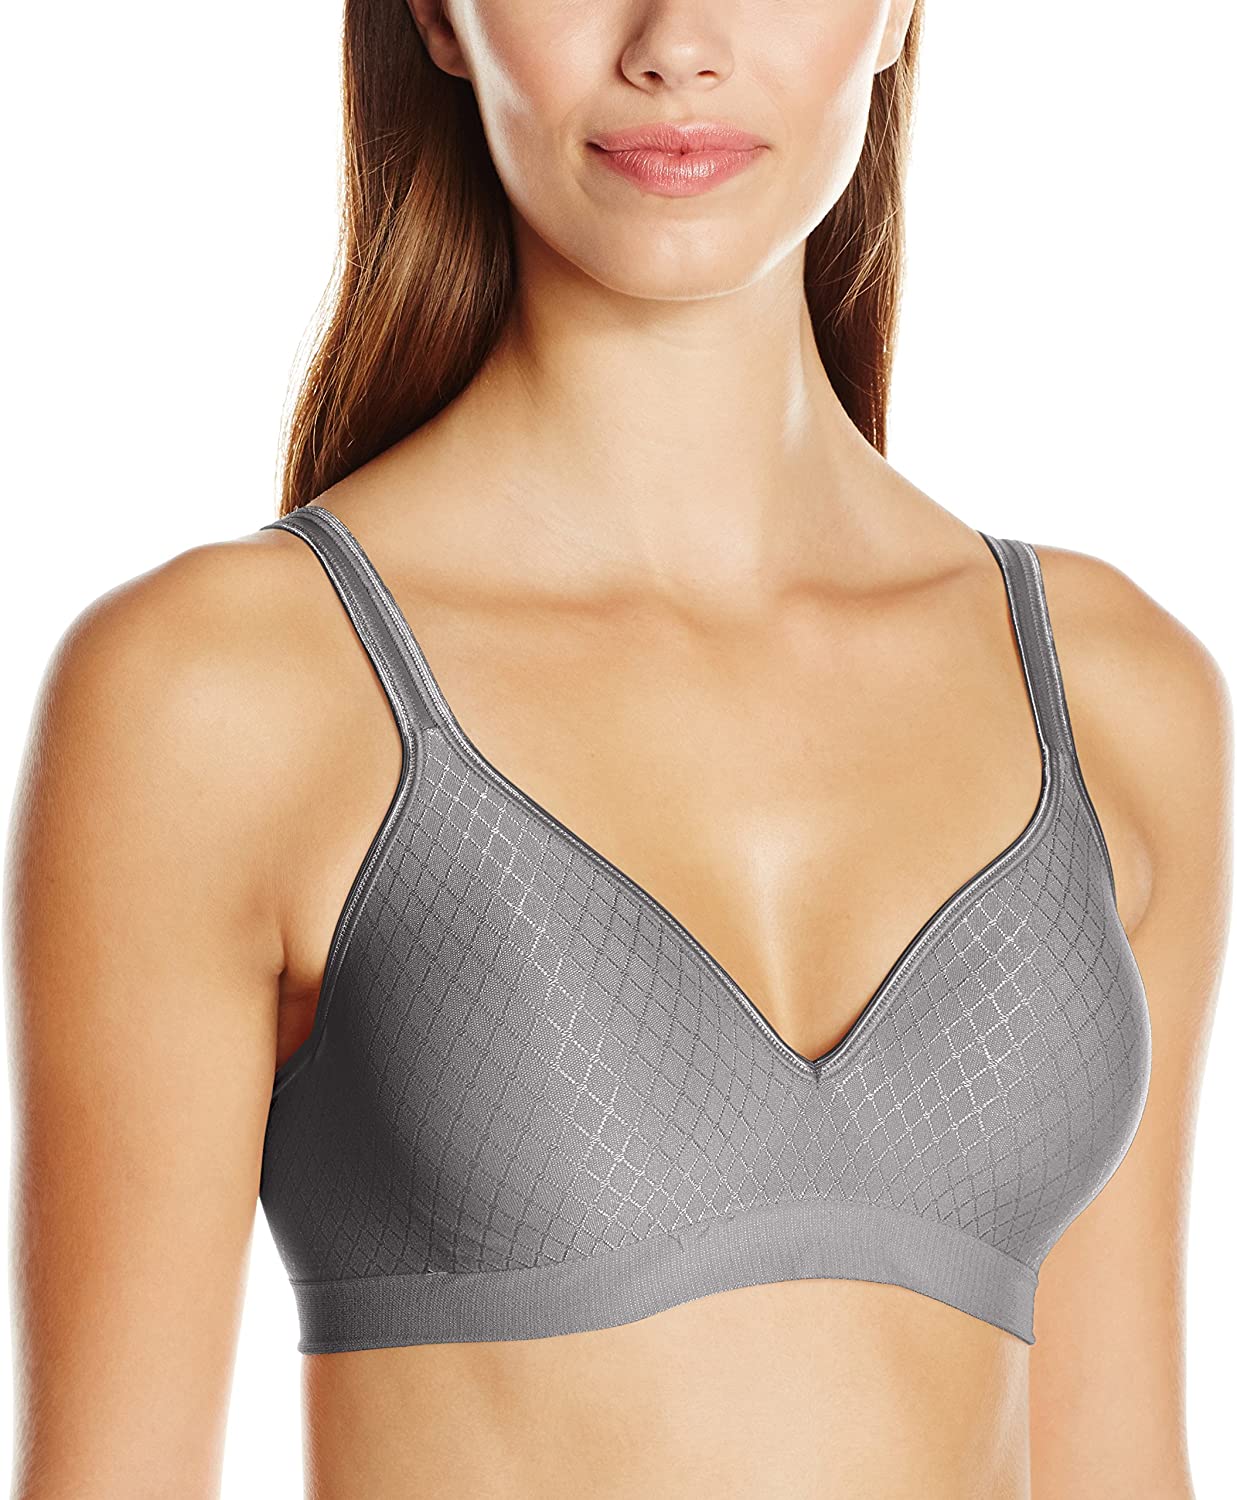 https://kasastyle.com/cdn/shop/products/hanes_20women_27s_20ultimate_20perfect_20coverage_20foam_20wire-free_20bra_20divine_20grey_20point_20d_27esprit_2001.jpg?v=1647796578